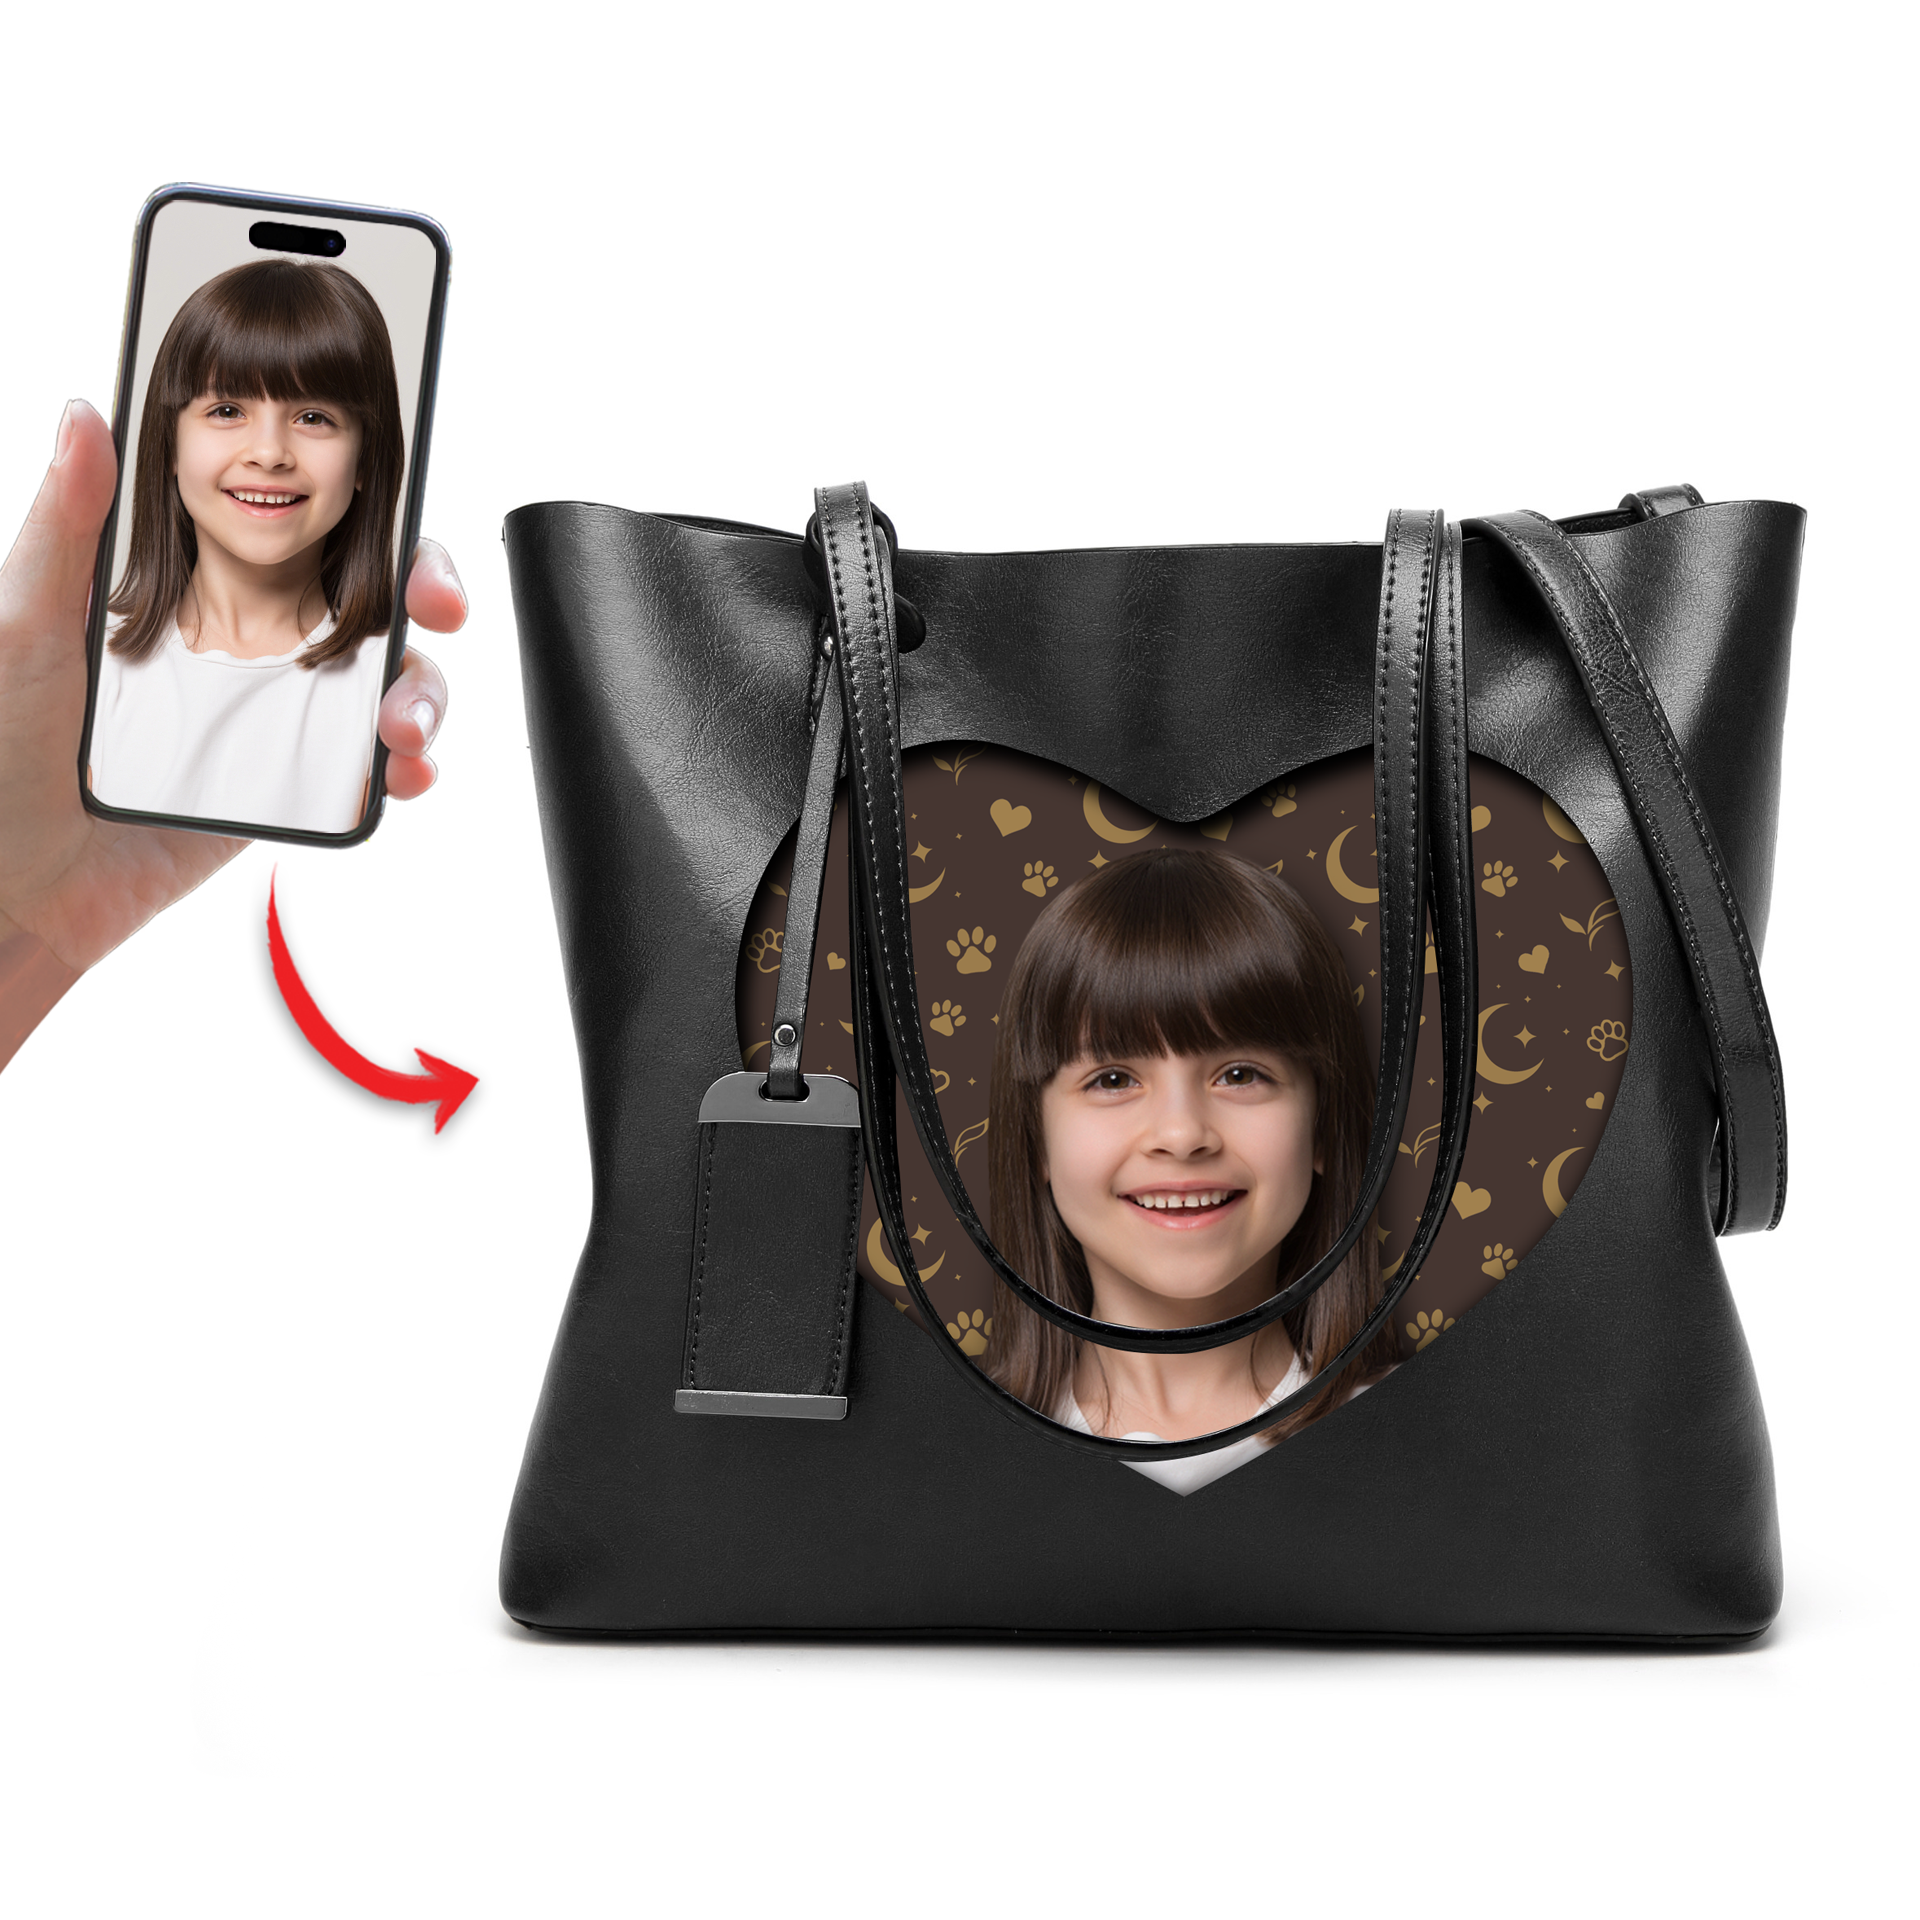 Personalized Glamour Handbag With Your Photo